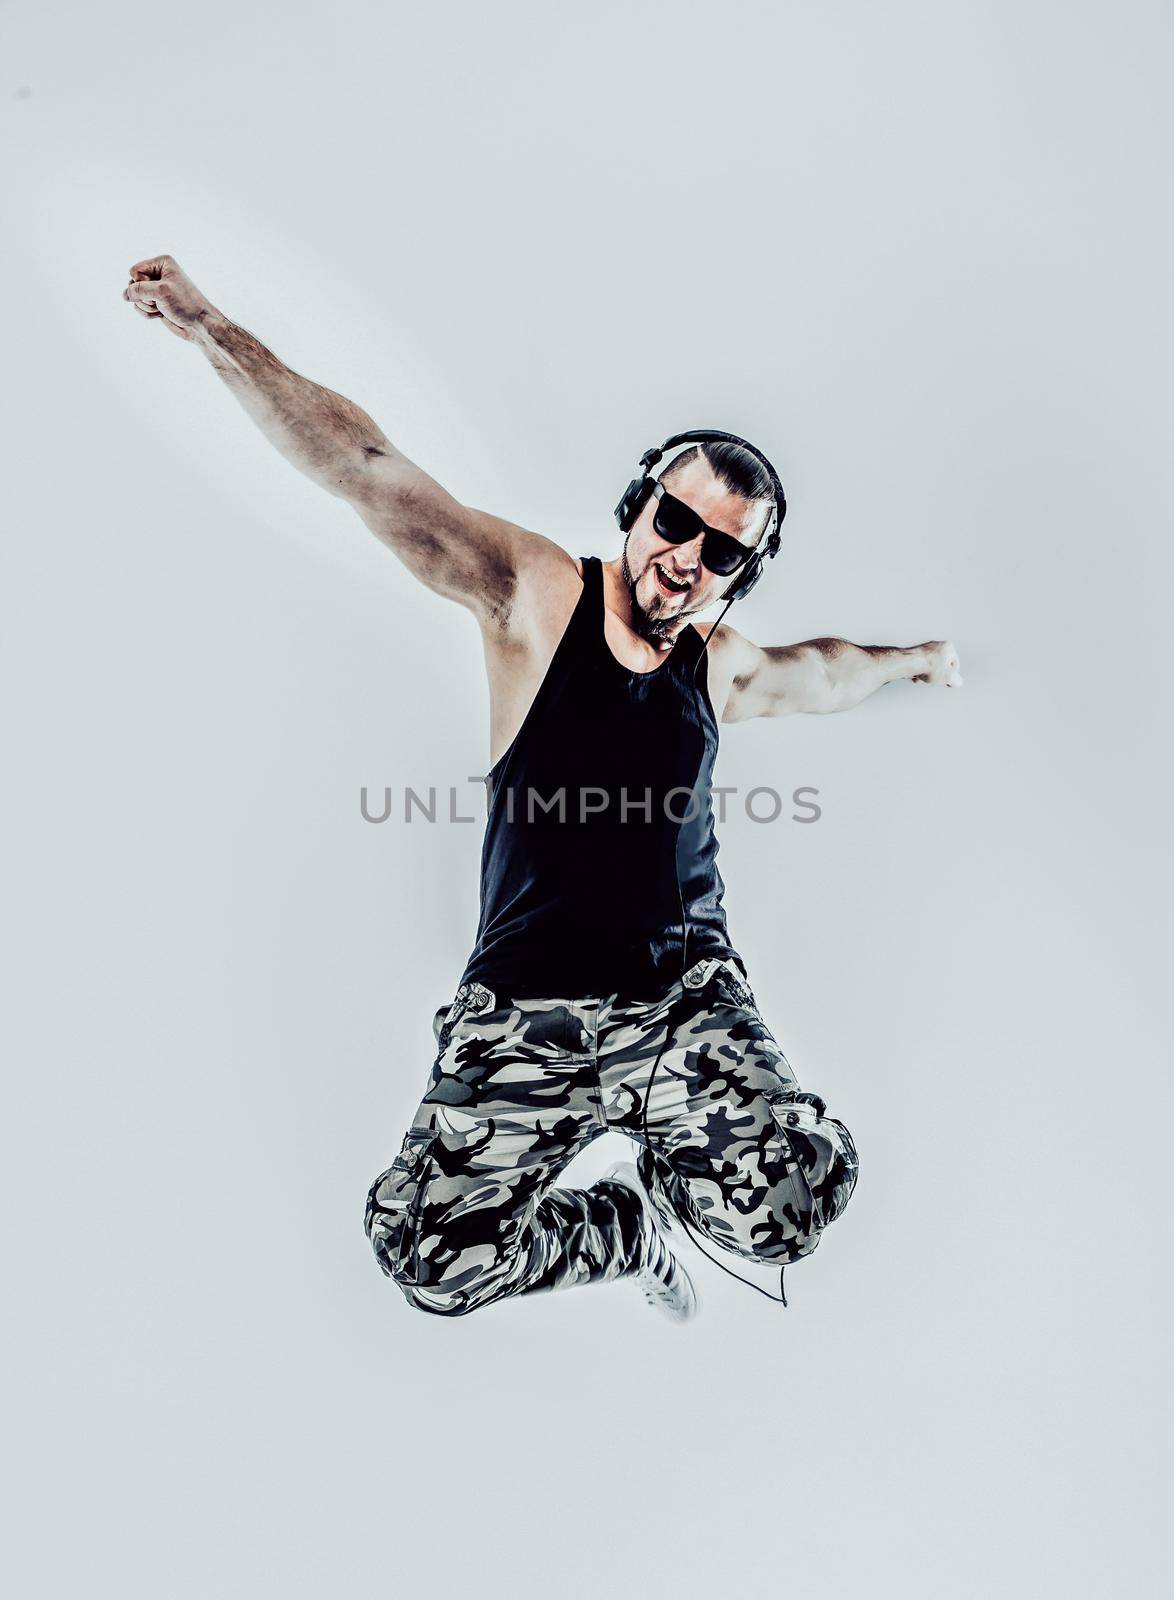 charismatic DJ - rapper with headphones on a white background.the photo has a empty space for your text